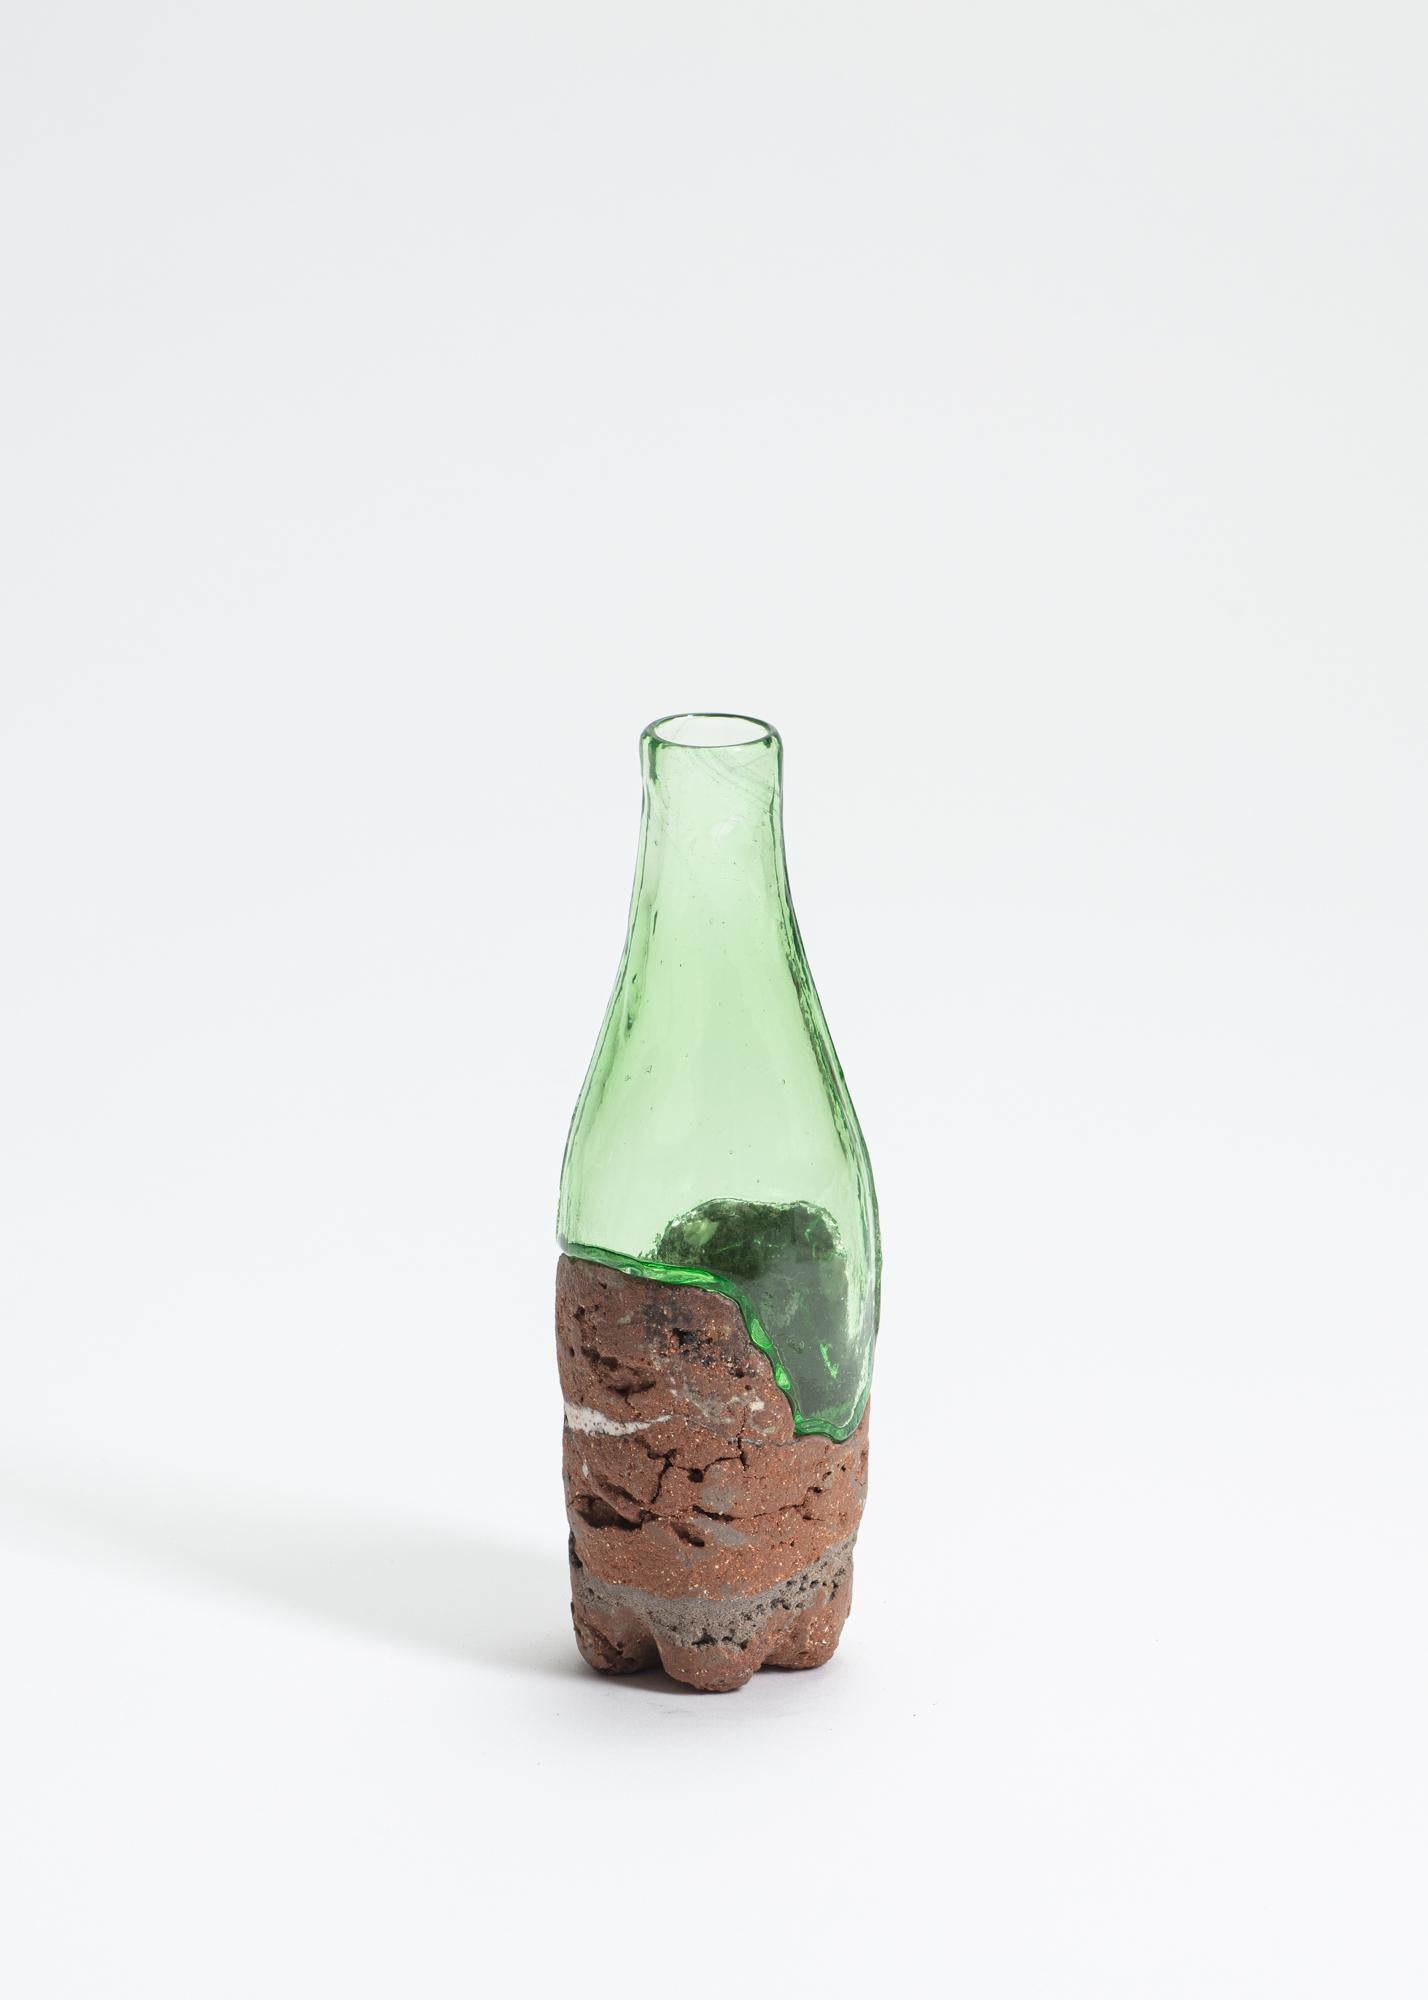 FUWA FUWA, No 3 bottle by Yusuke´ Y. Offhause
One of a Kind, the work is in two parts (ceramic and glass).
Dimensions: D 6.5 x W 6.5 x H 20 cm.
Materials: stoneware, porcelain, glass.

Yusuke´ Y. Offhause:
